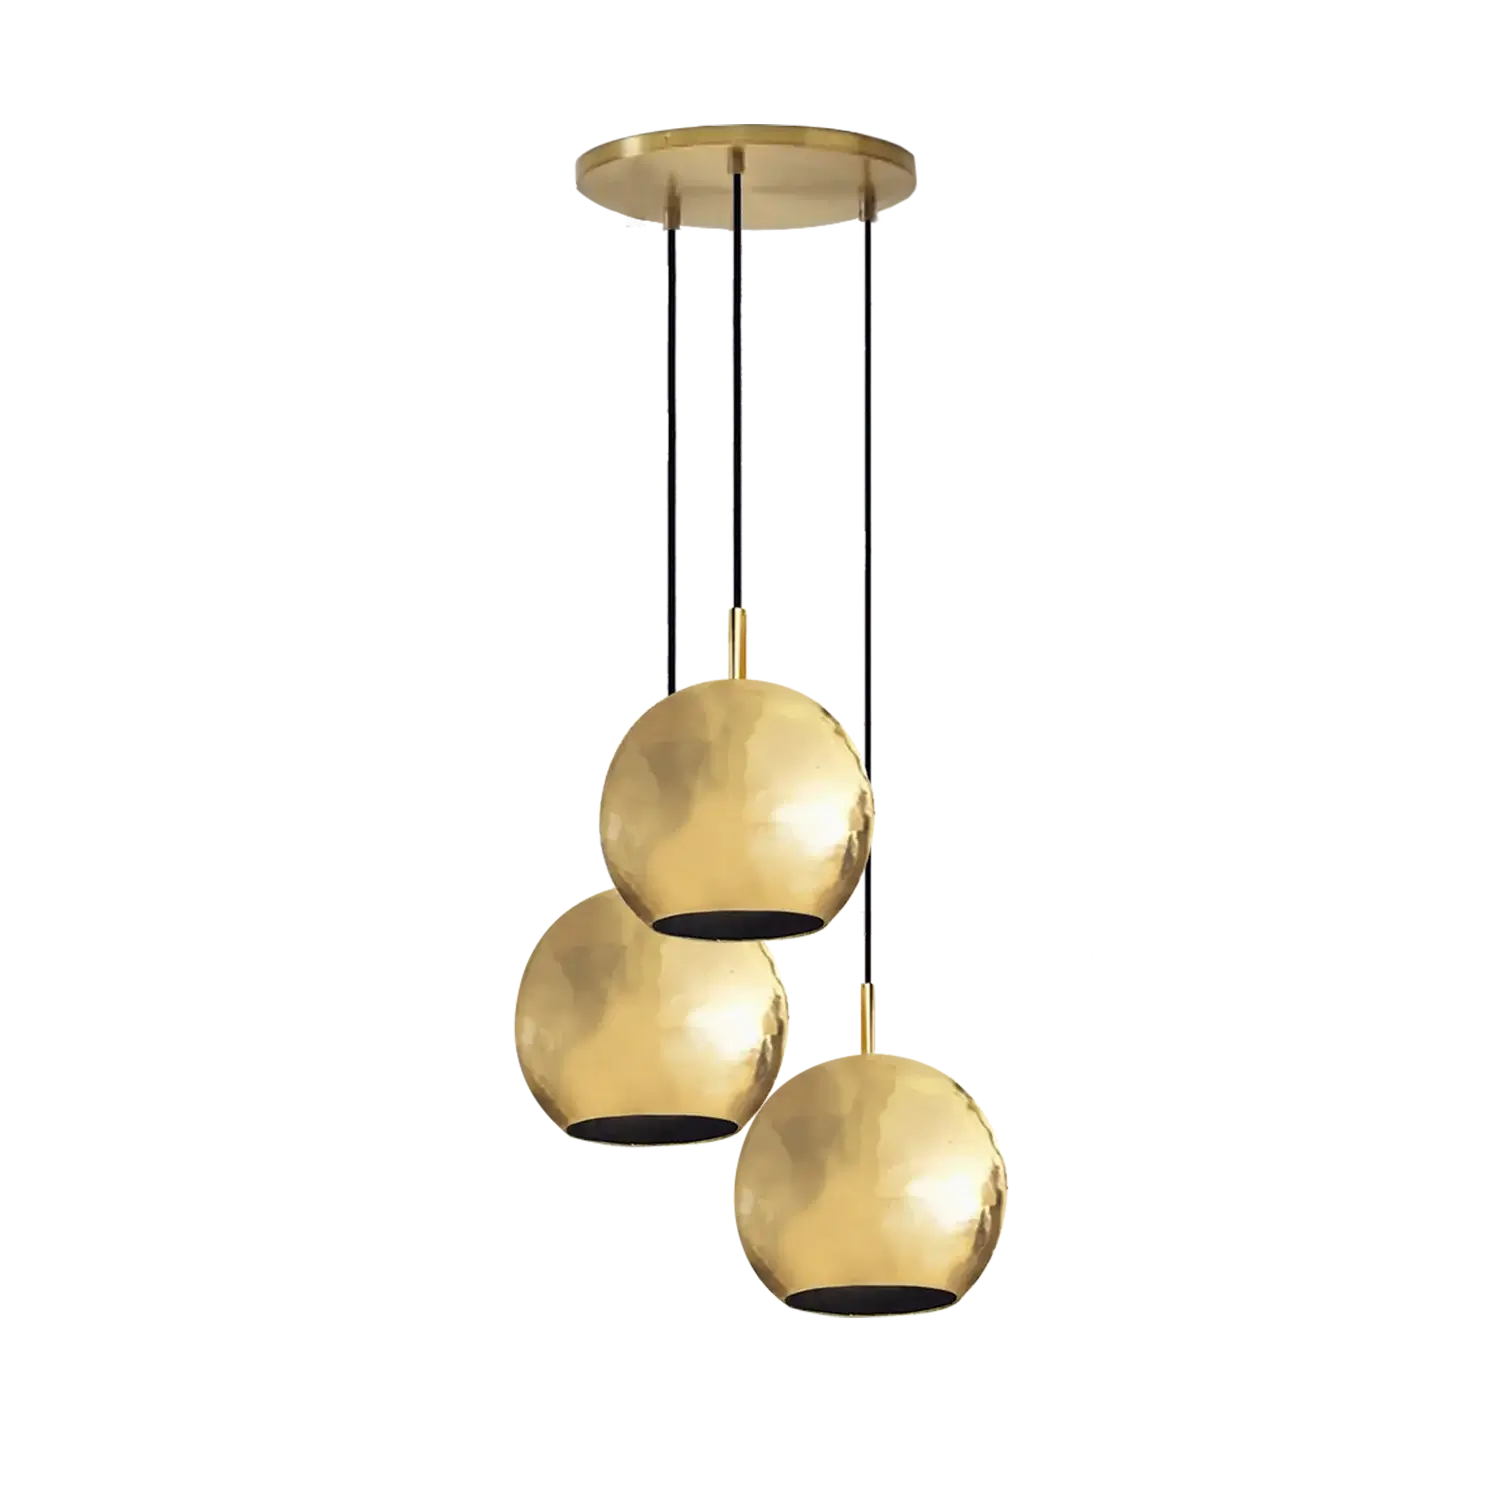 Dounia home chandelier in Polished brass  made of Metal, Model: Mishal